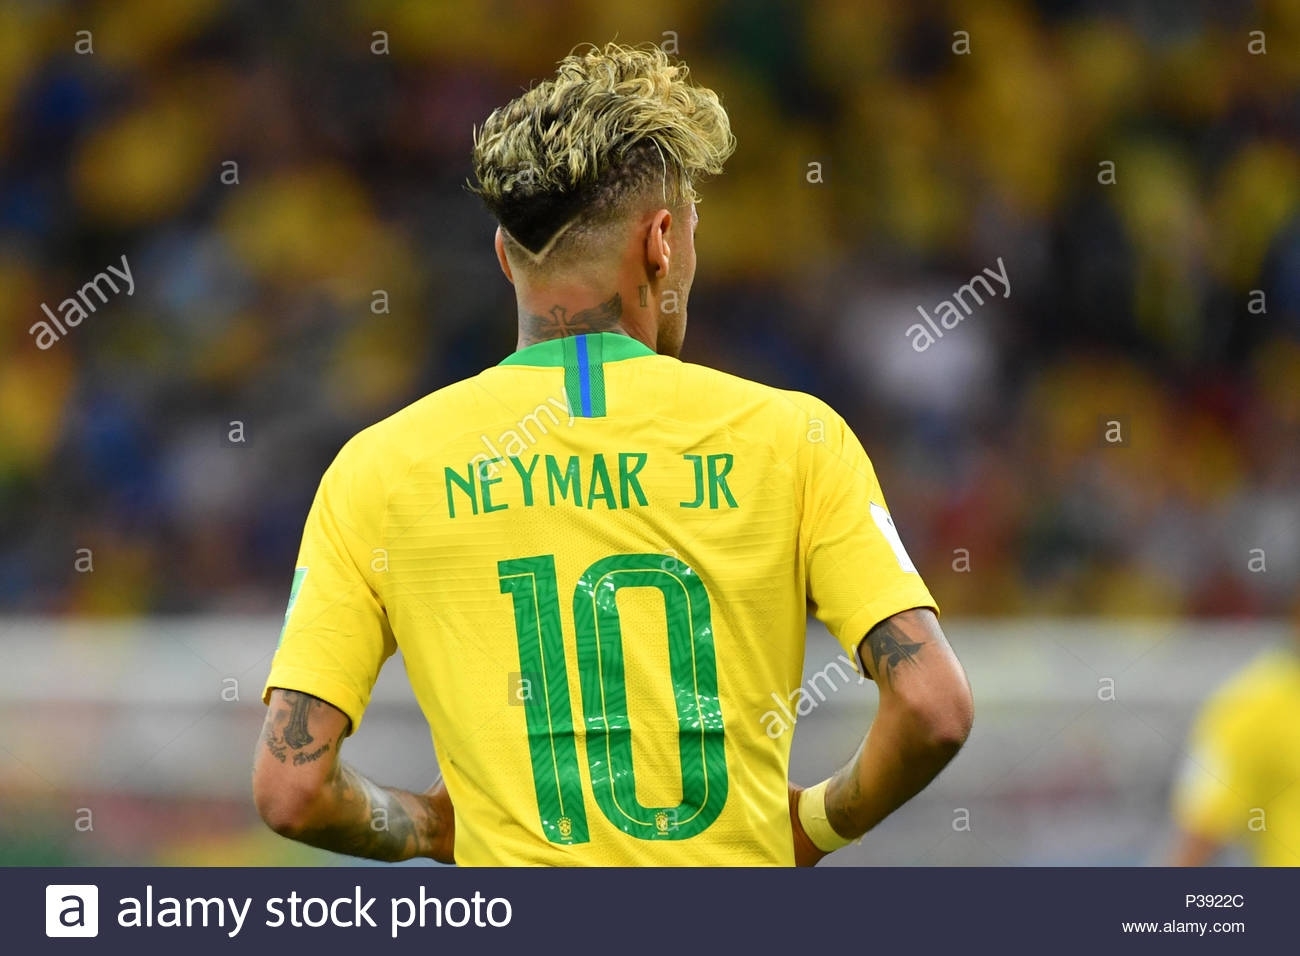 Neymar (Bra), Rear View, Back, Hairstyle, Action, Single Image intended for Neymar Haircut 2018 Back View